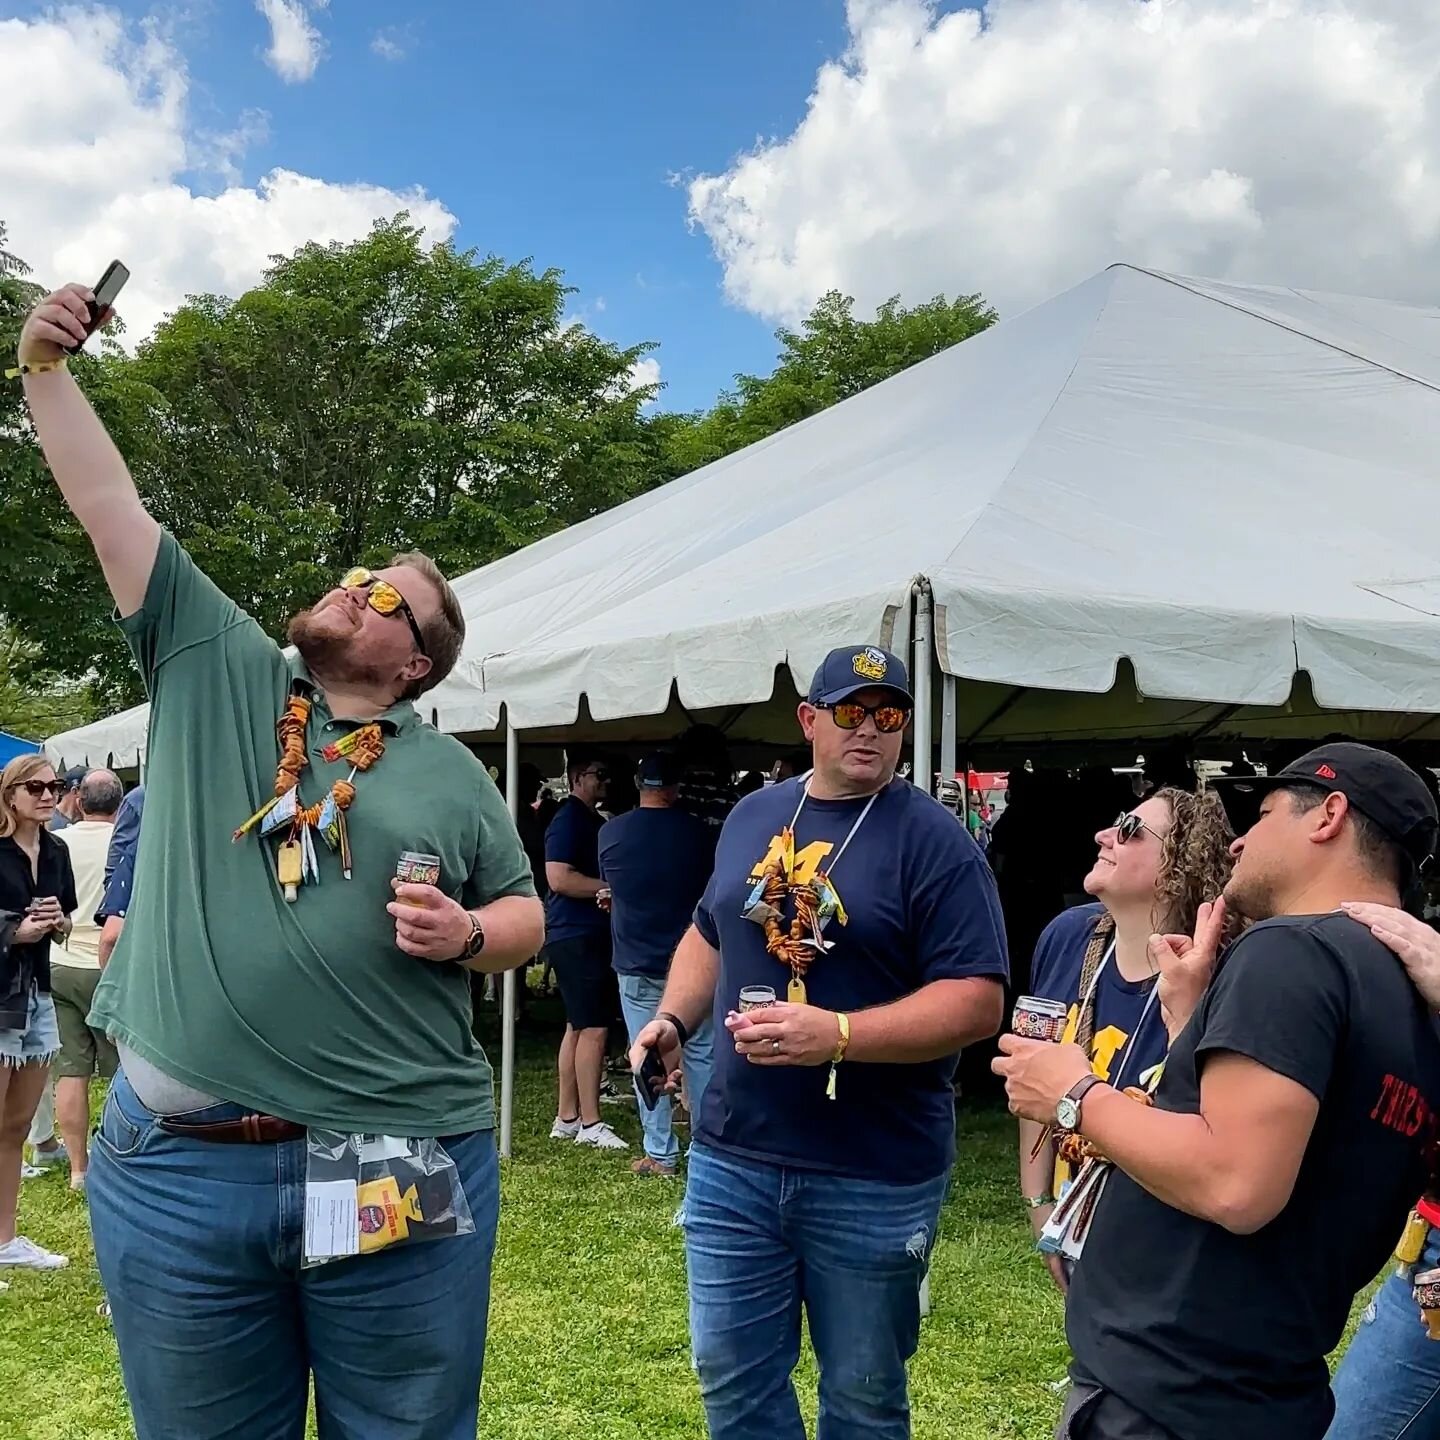 This cold and snow has us dreaming of April in East Park! Remember our throwback ticket pricing is currently $45, so grab your tickets and come raise a glass with us on 4/13/24, L'Chaim! 

#beer #craftbeer #sunshine #nashville #nashvilletn #eastnashv